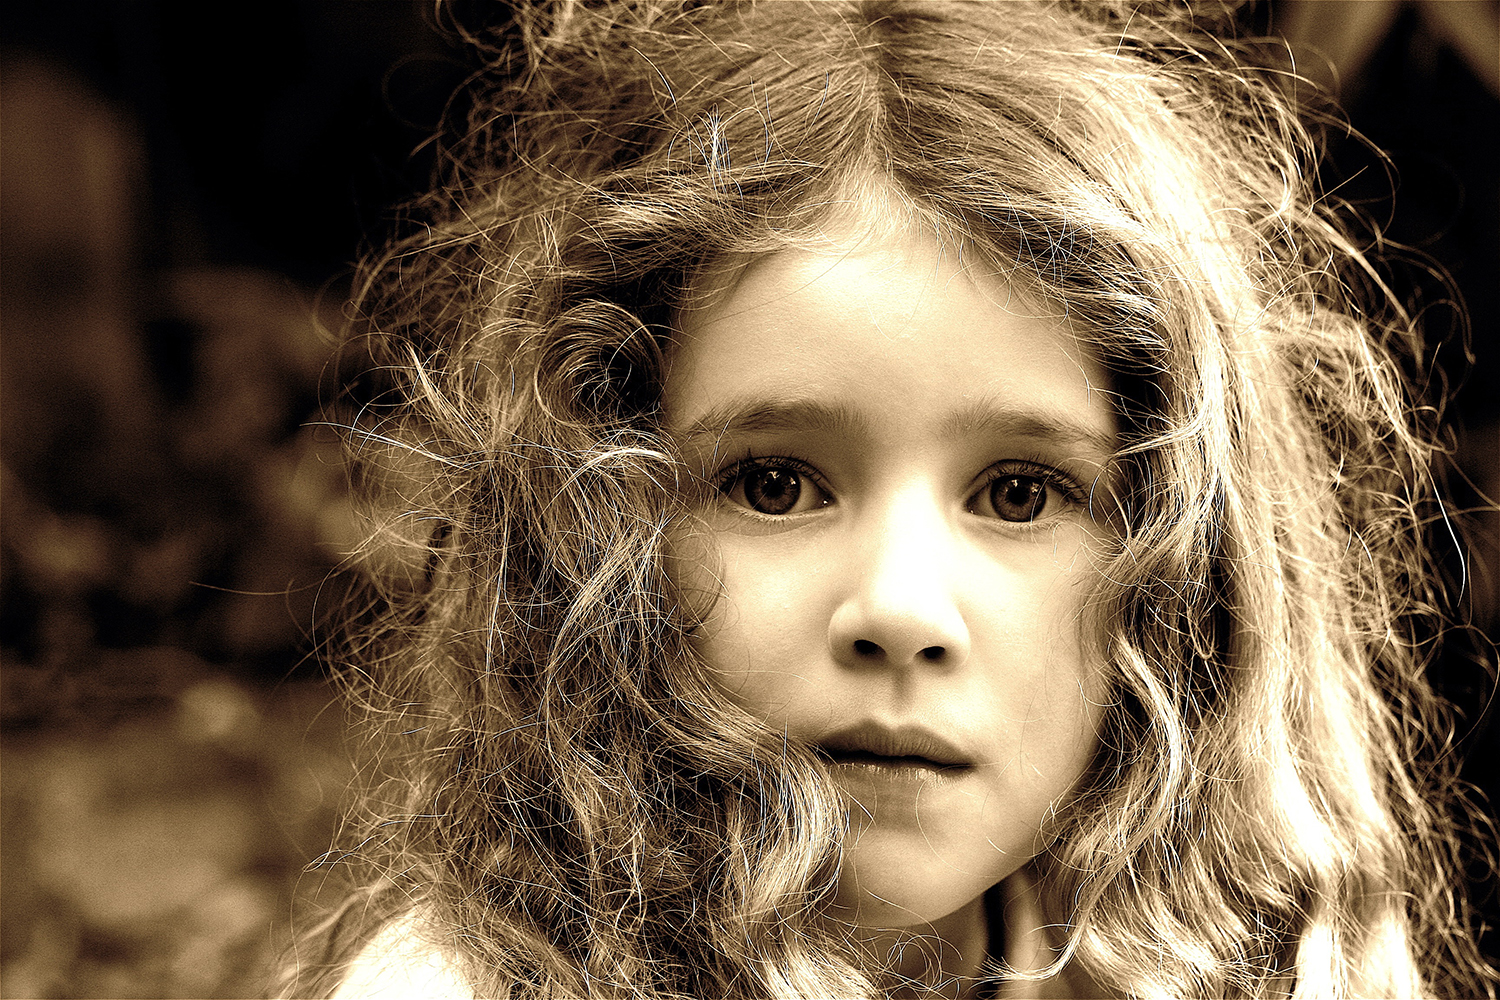 Black and white photo of little girl with long curly hair staring into the camera